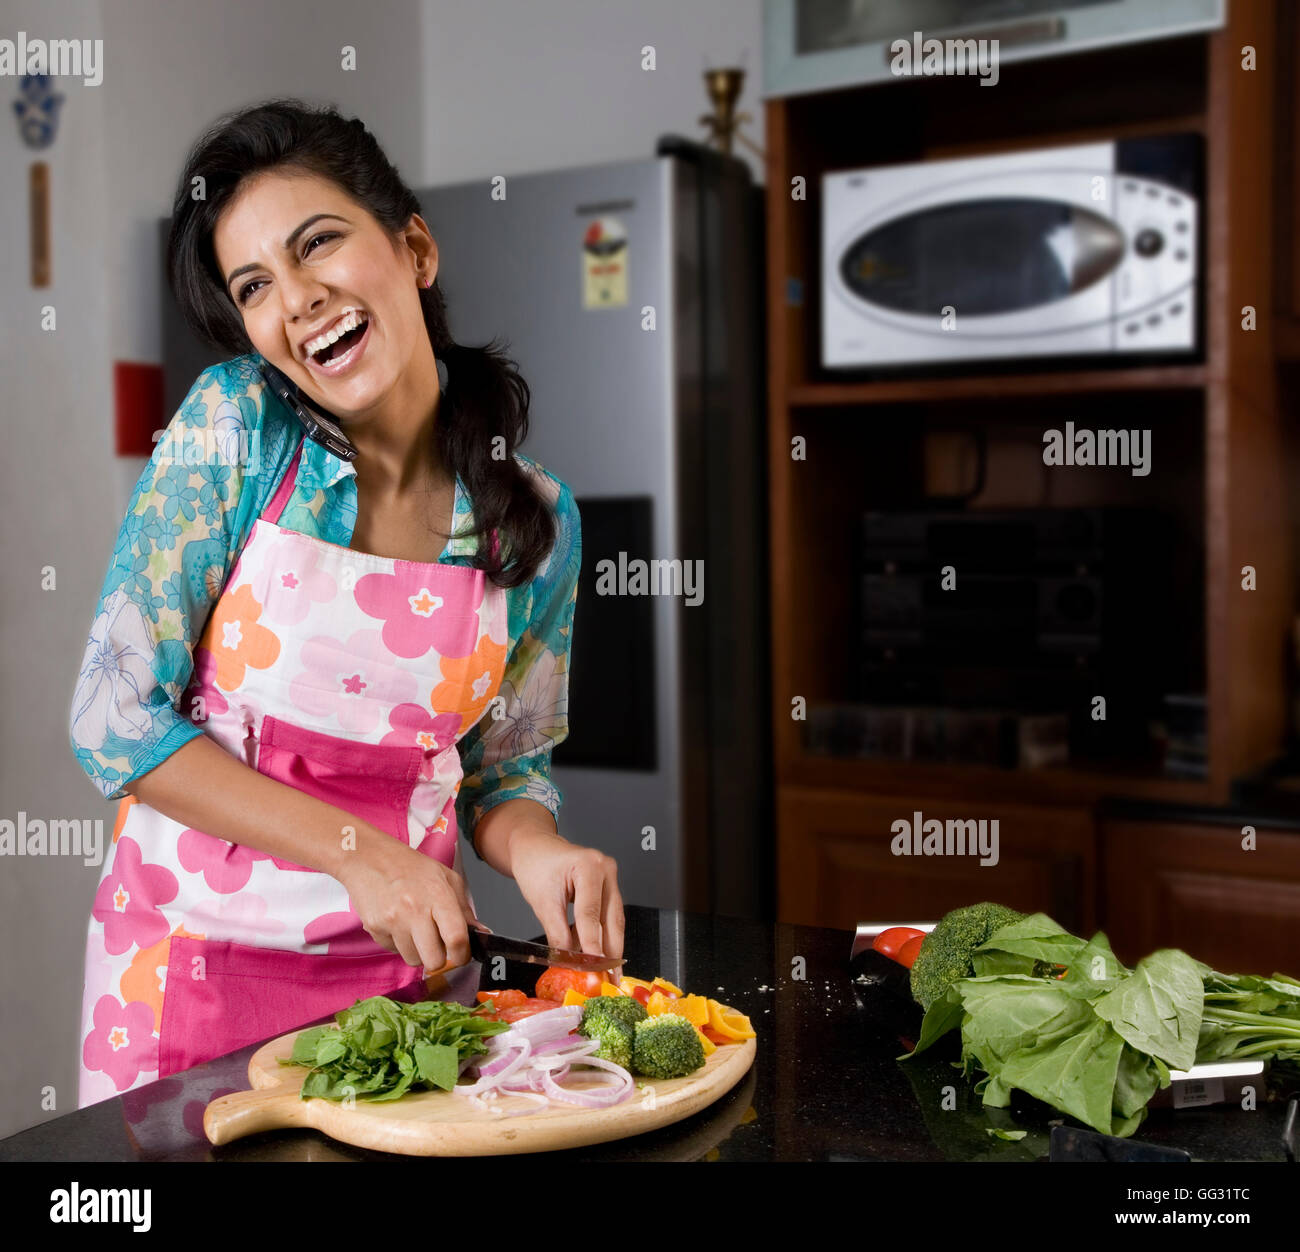 A housewife Stock Photo